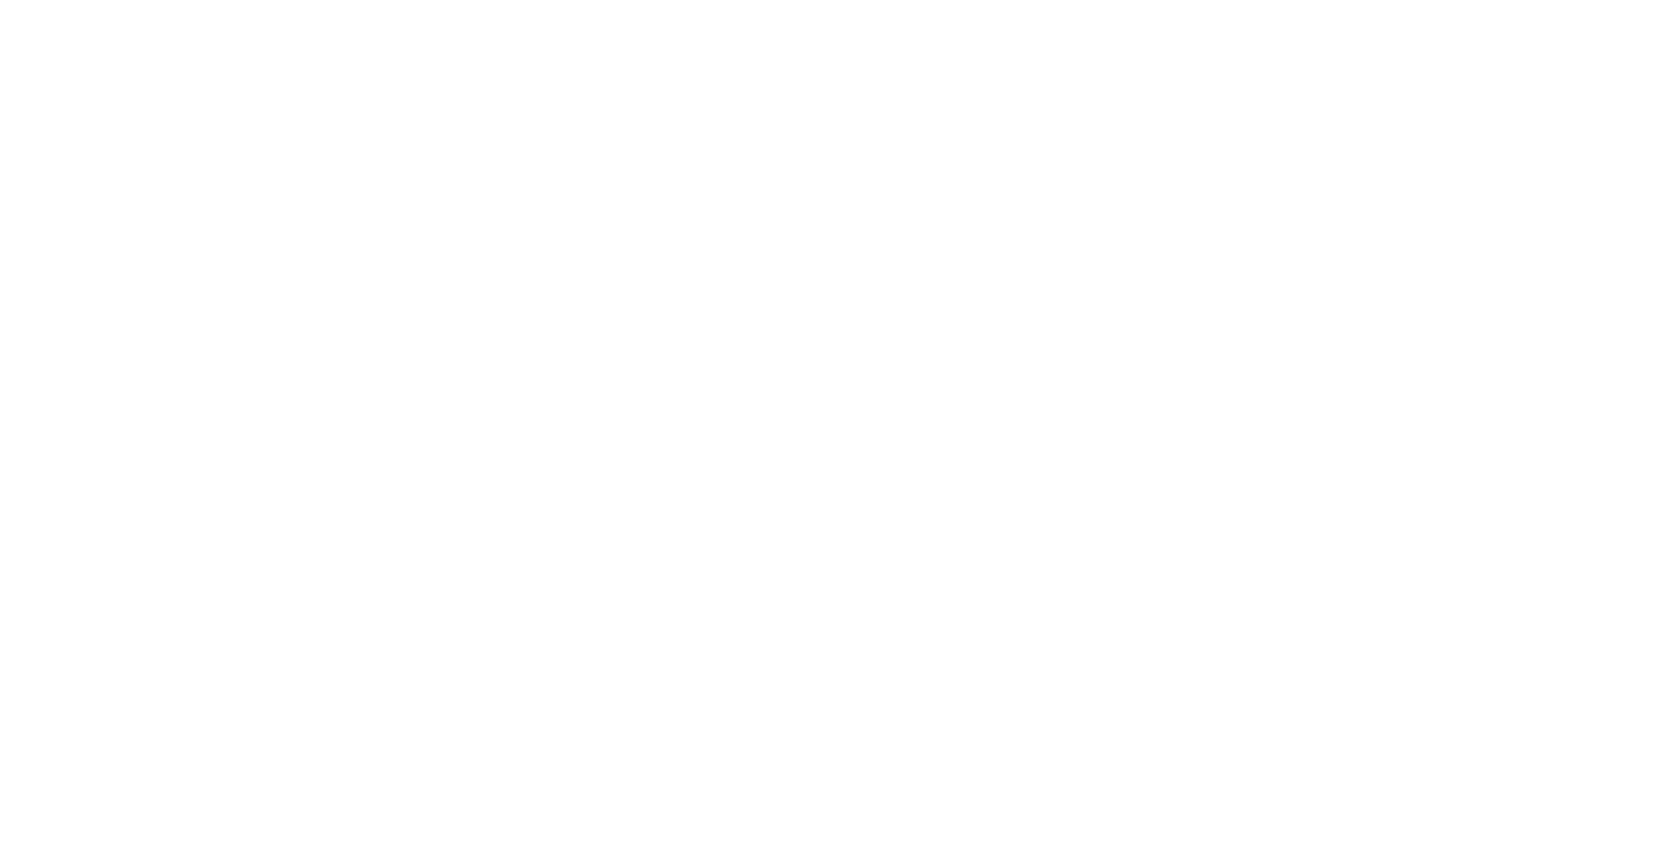 http://Burnt%20Orange%20logo%20with%20words%20Est.%202021,%20ALL%20DAY%20&%20LATE%20NIGHT